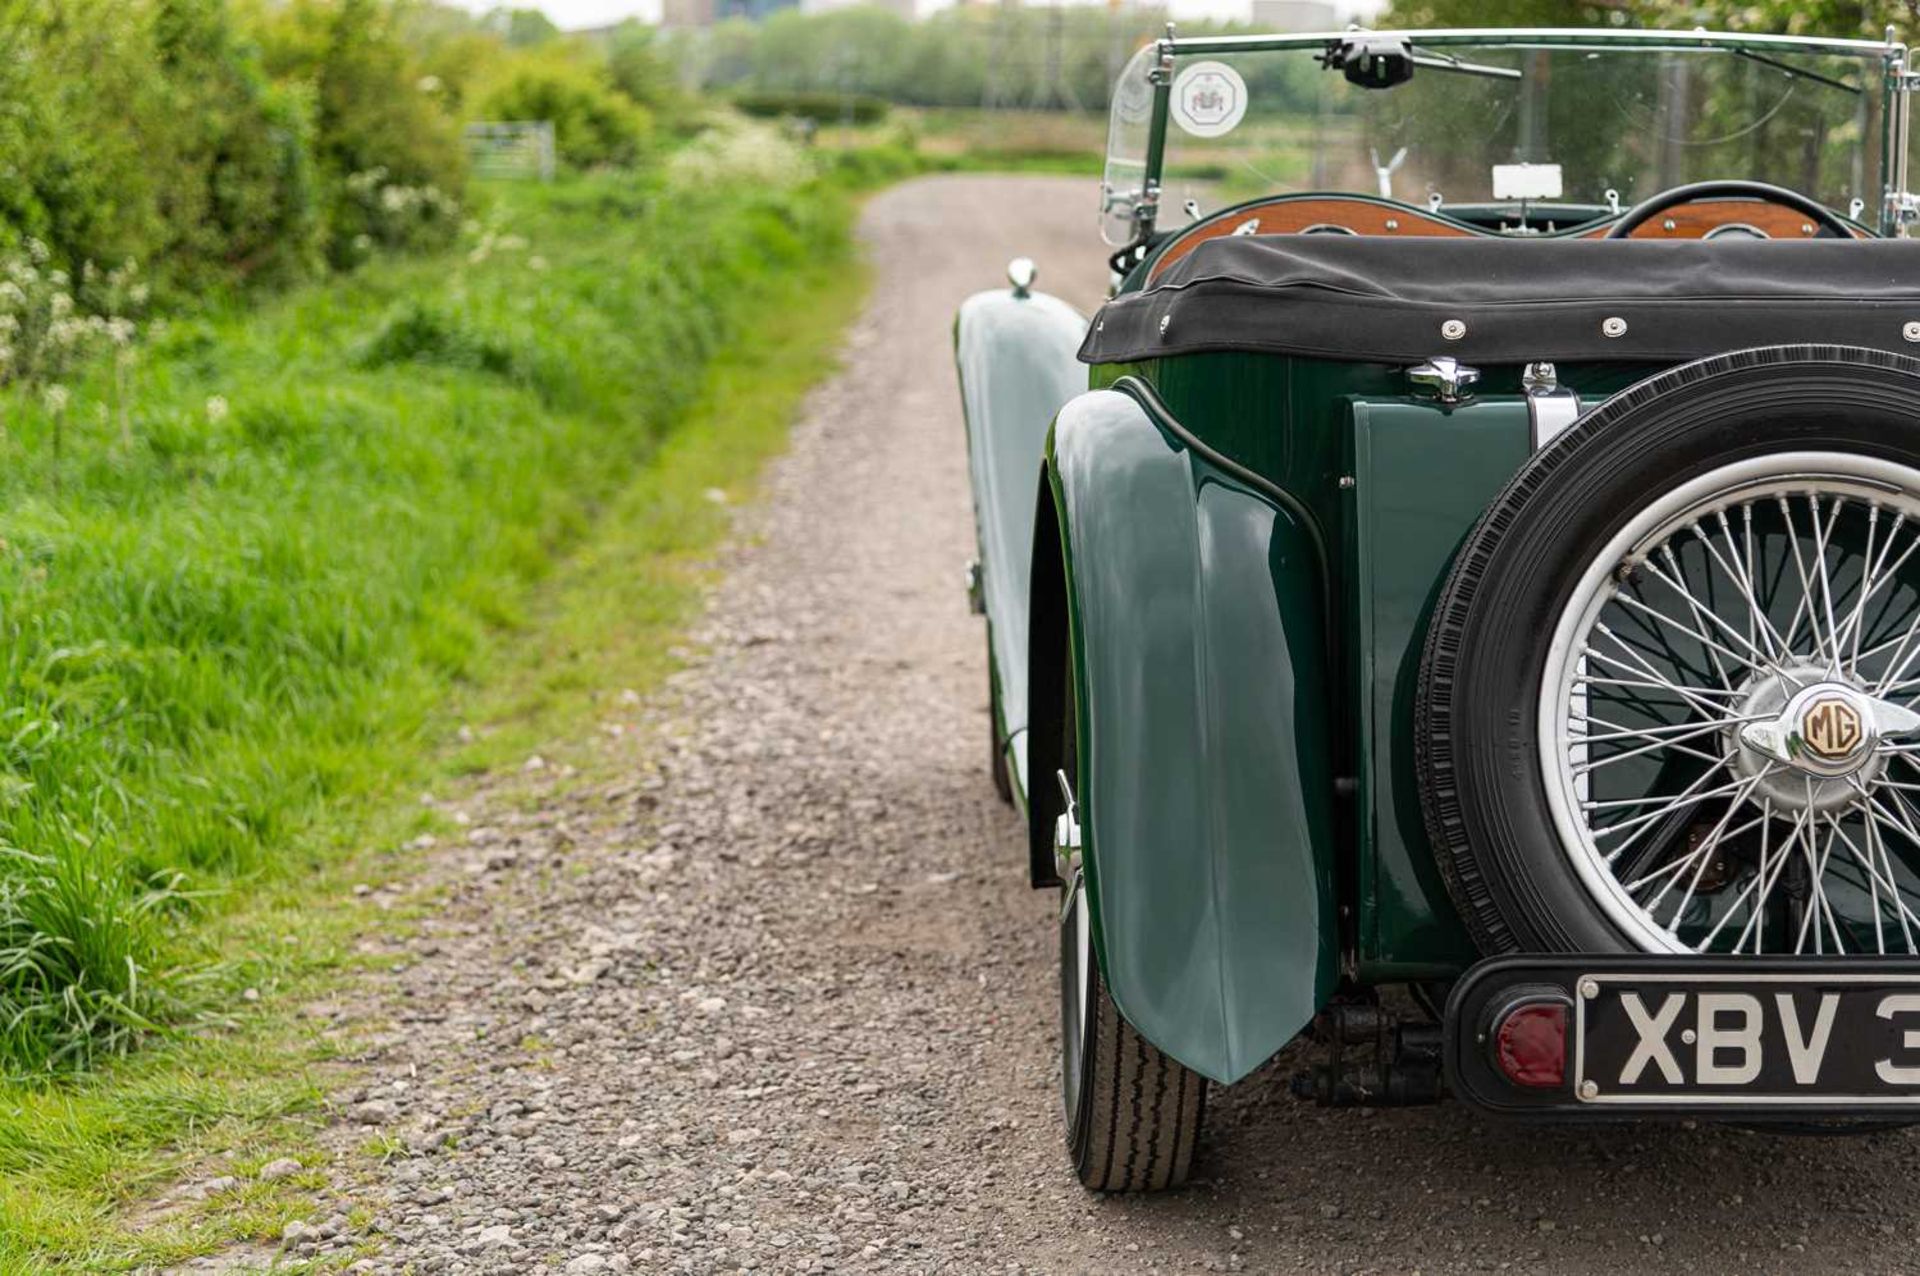 1947 MG TC Midget  Fully restored, right-hand-drive UK home market example - Image 18 of 76